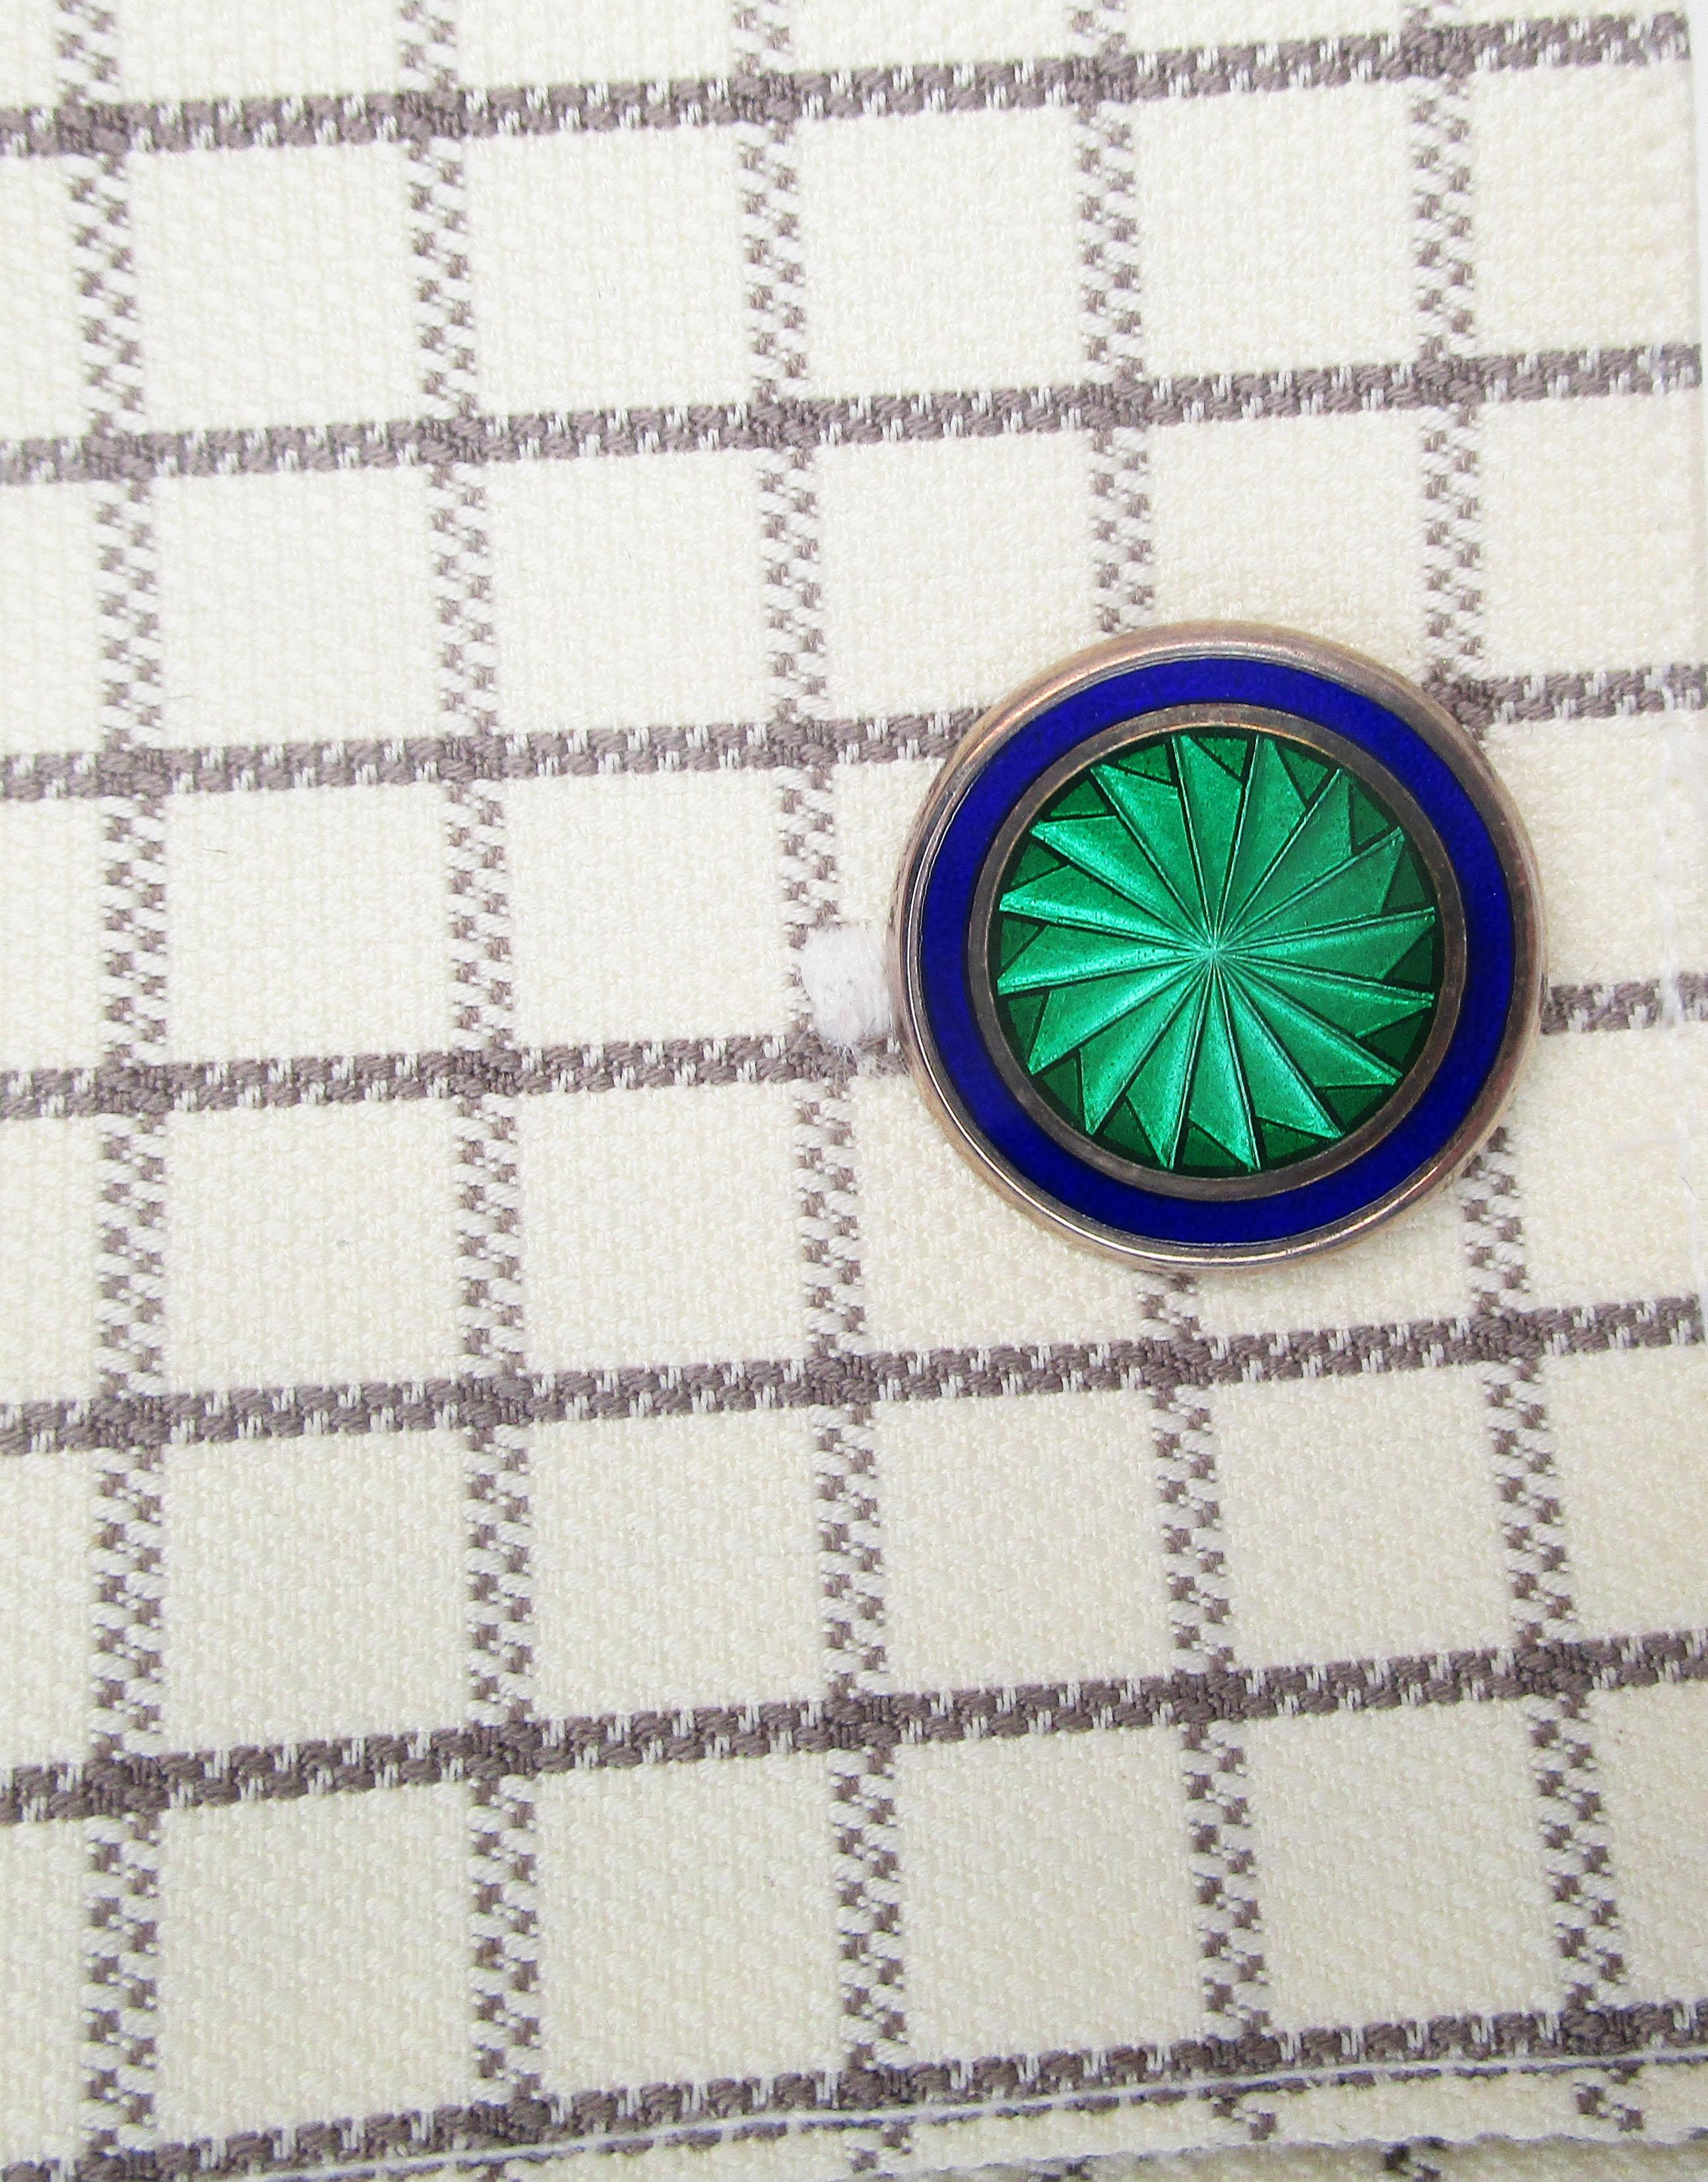 This is an excellent pair of large scale English cufflinks in sterling silver with a great blue and green design! The panels of these links feature a bright blue border and a subtly detailed green spiral center! The color scheme gives these links a